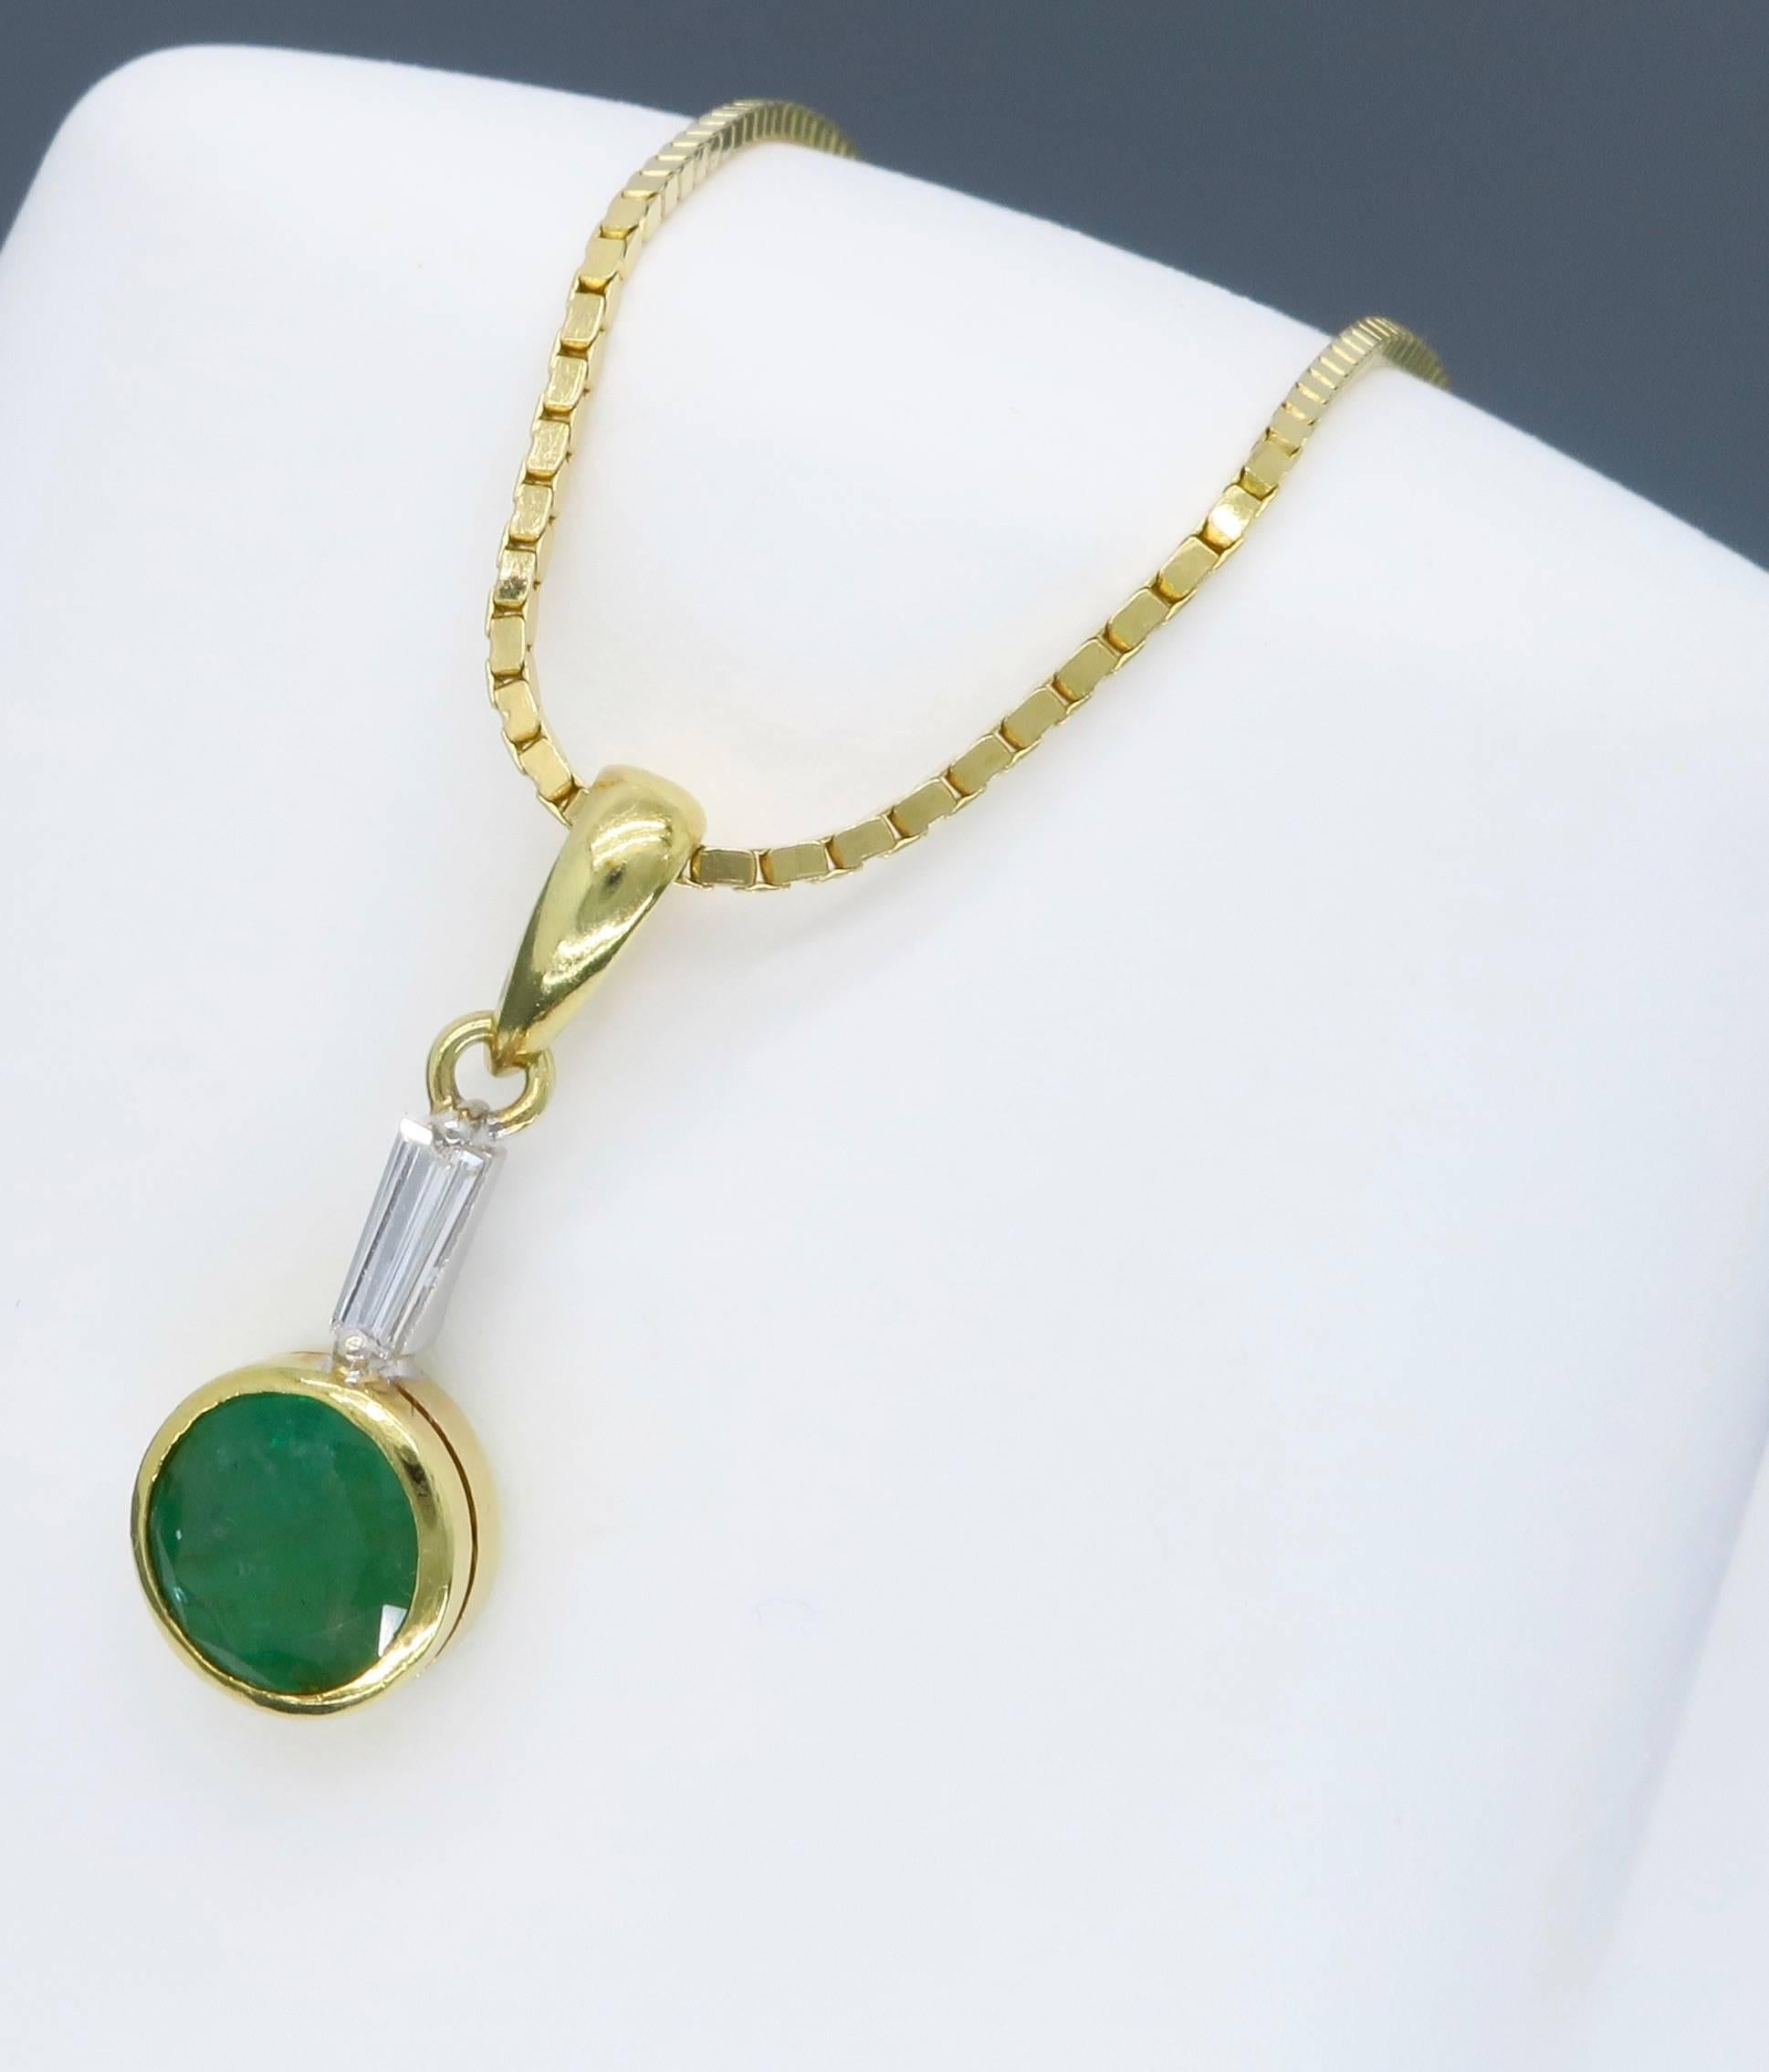 This necklace features a 6.75mm Round Cut Emerald, which is accented by a Tapered Baguette Cut Diamond weighing approximately .10CT. The 14K yellow gold necklace is 16” in length and weighs 5.4 grams.